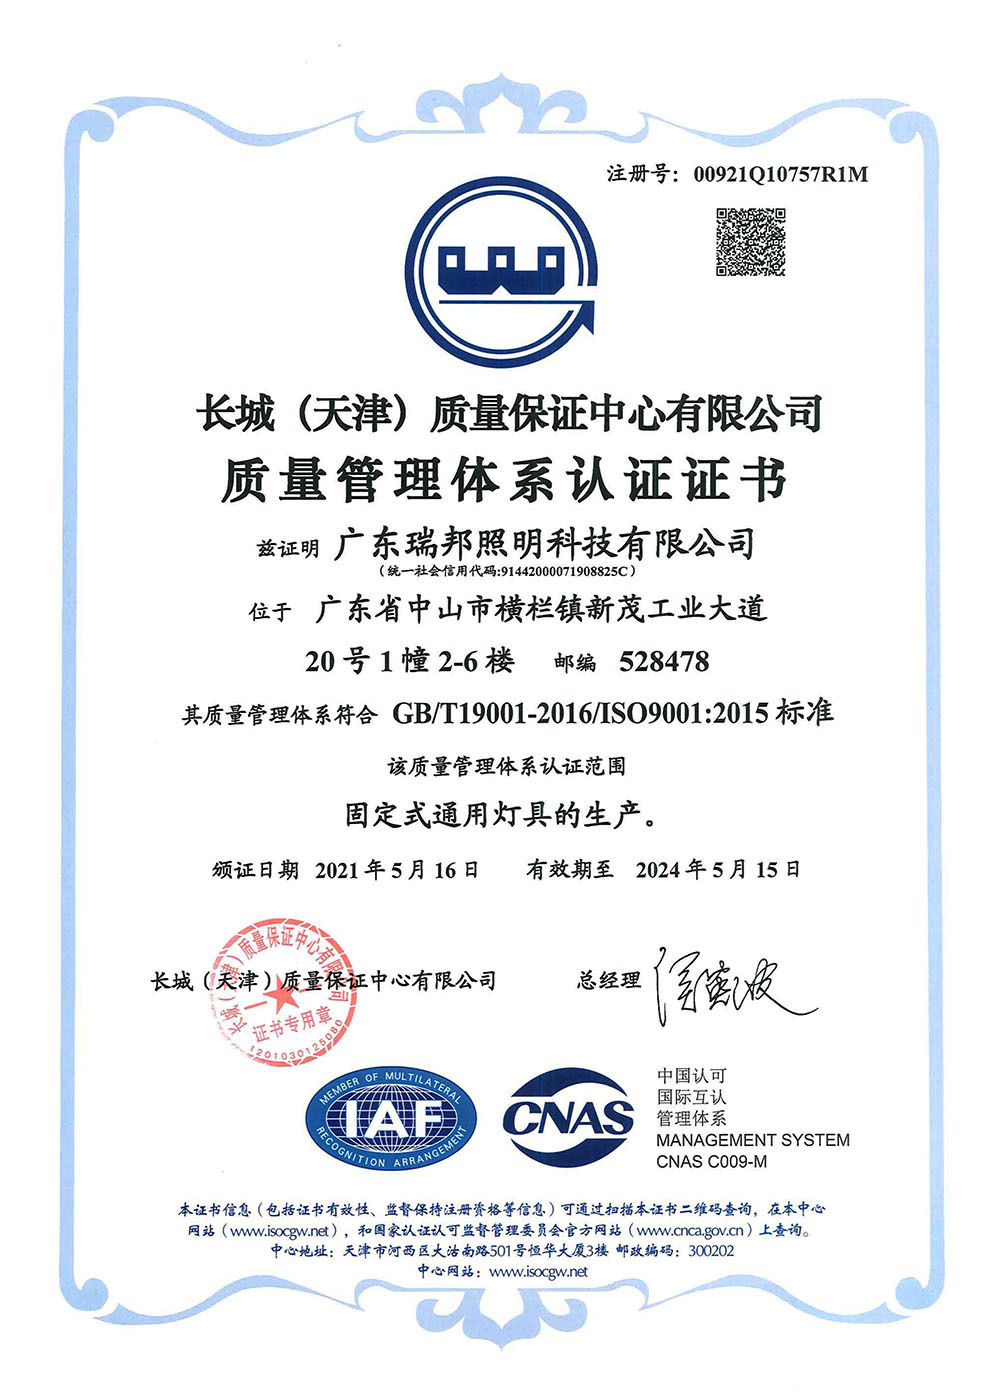 Copy of Quality Management System ISO9001 Certificate in Chinese